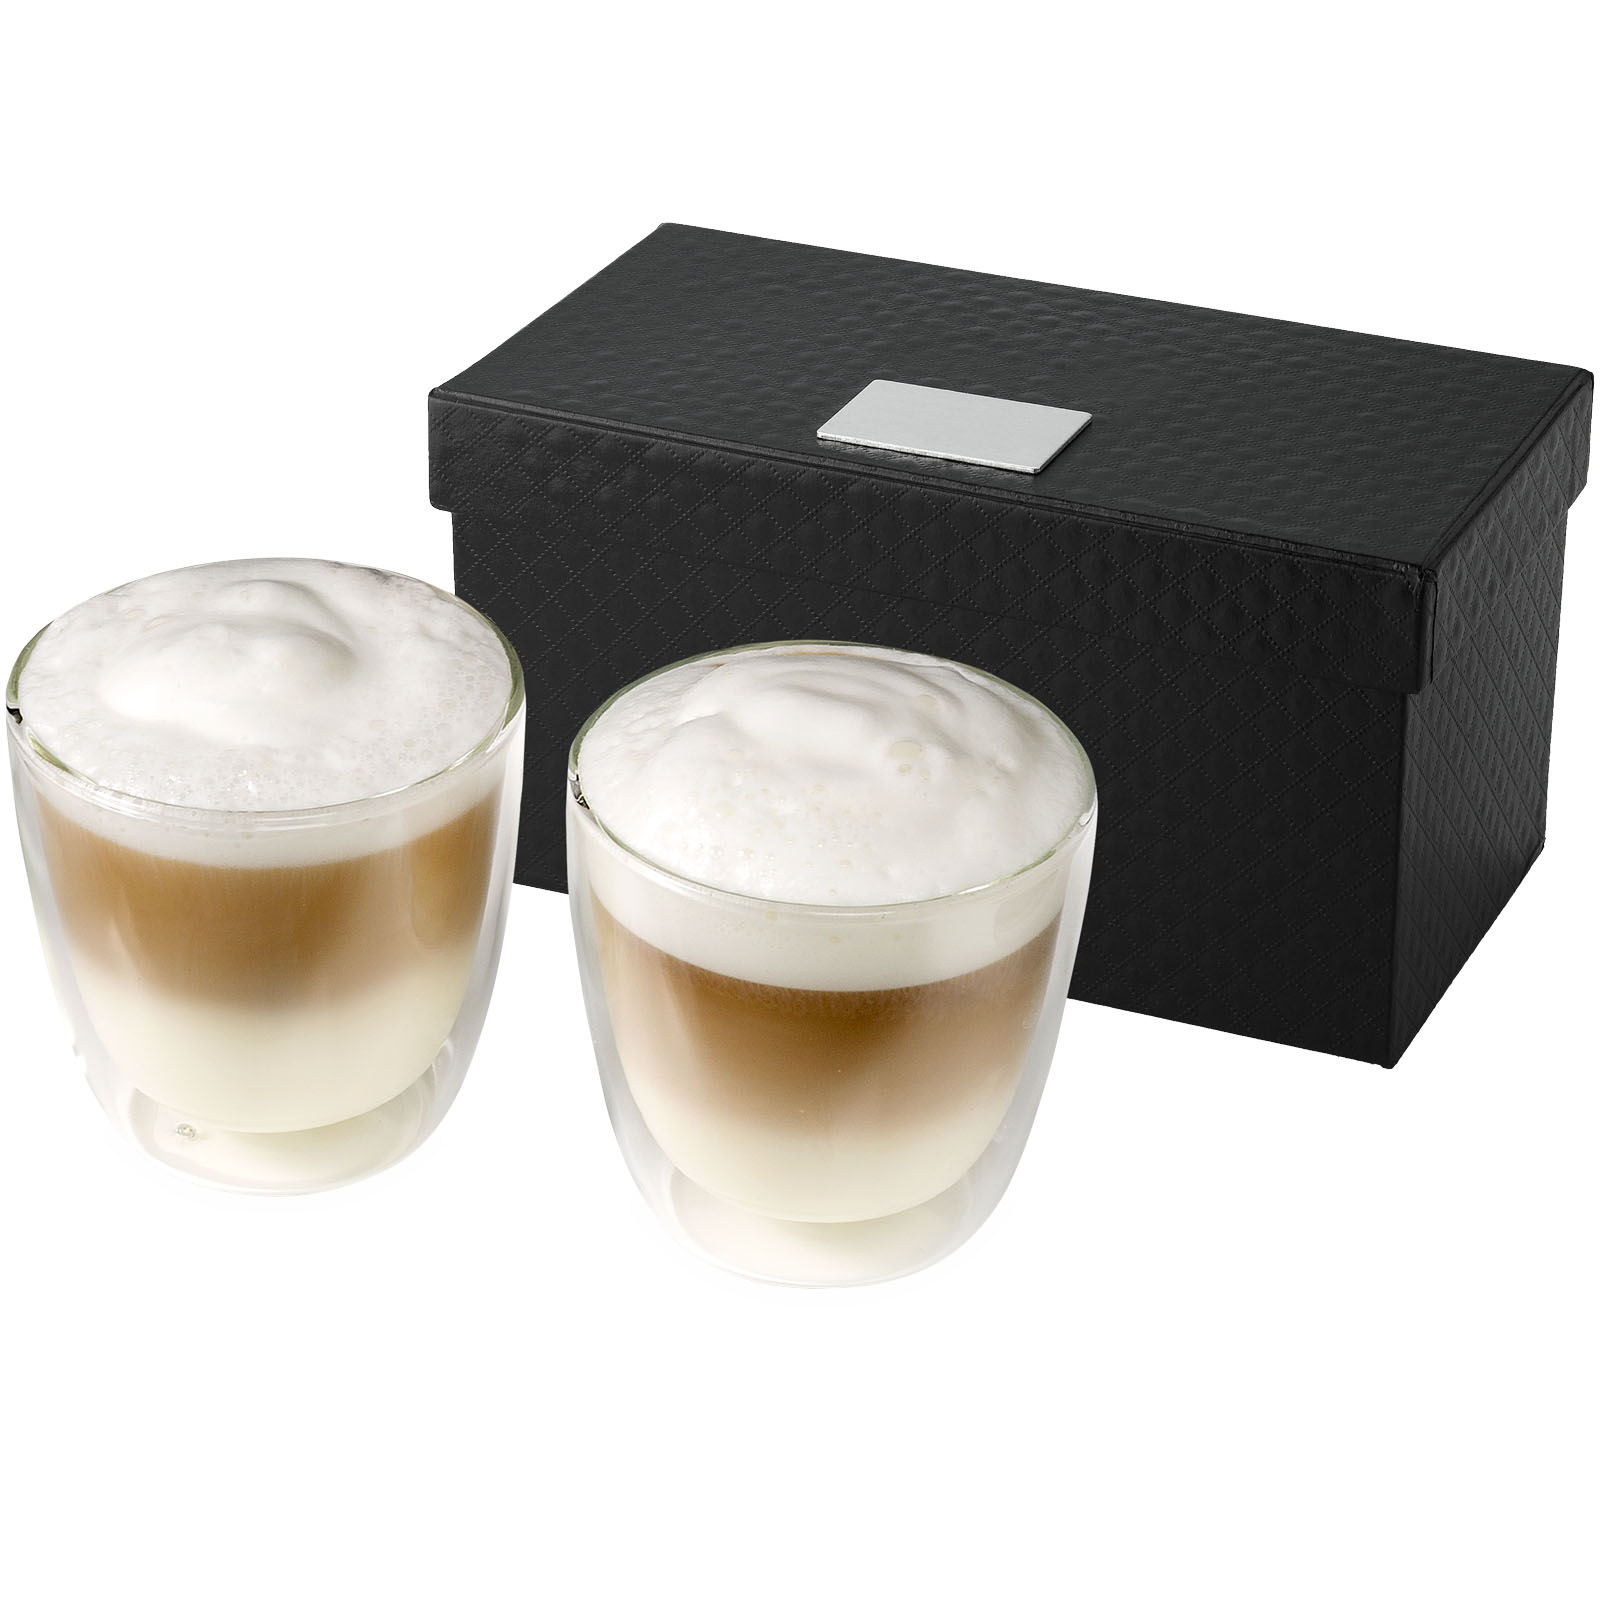 Advertising Glasses - Boda 2-piece glass coffee cup set